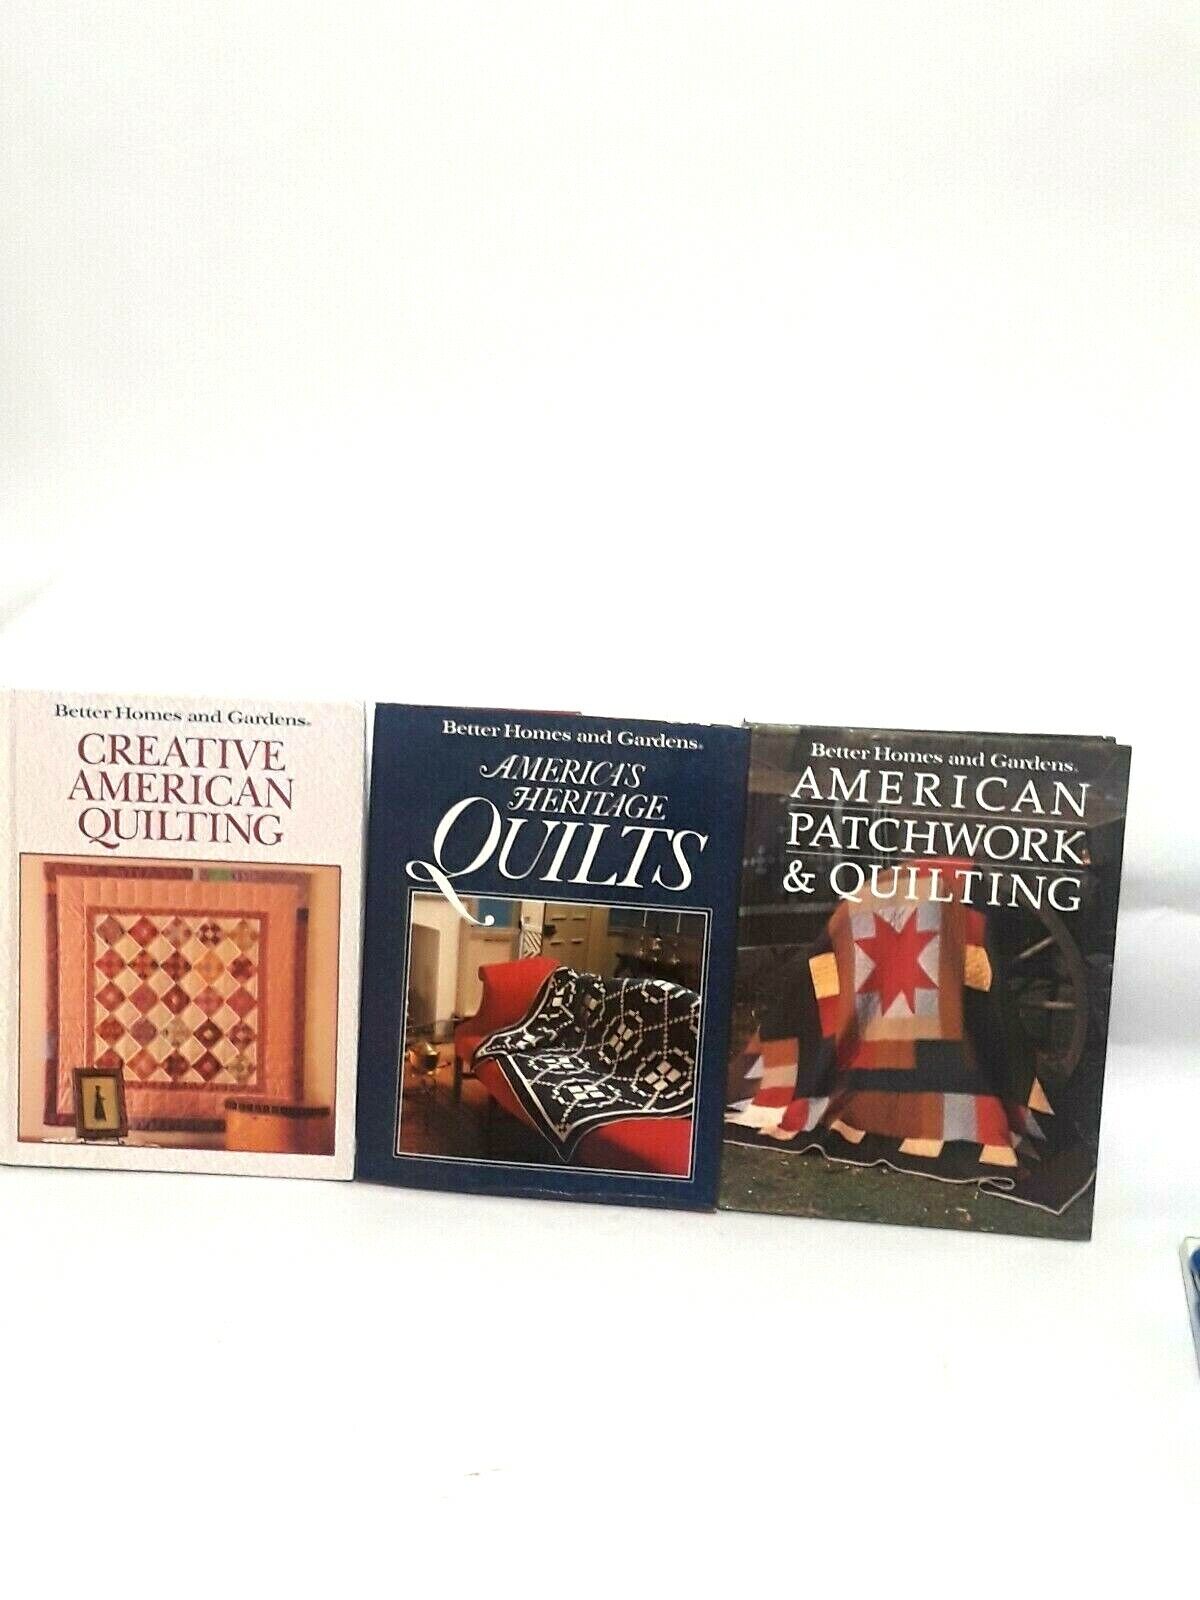 Vtg Better Homes Gardens  AMERICAN PATCHWORK & QUILTING 2010 3 Books EUC